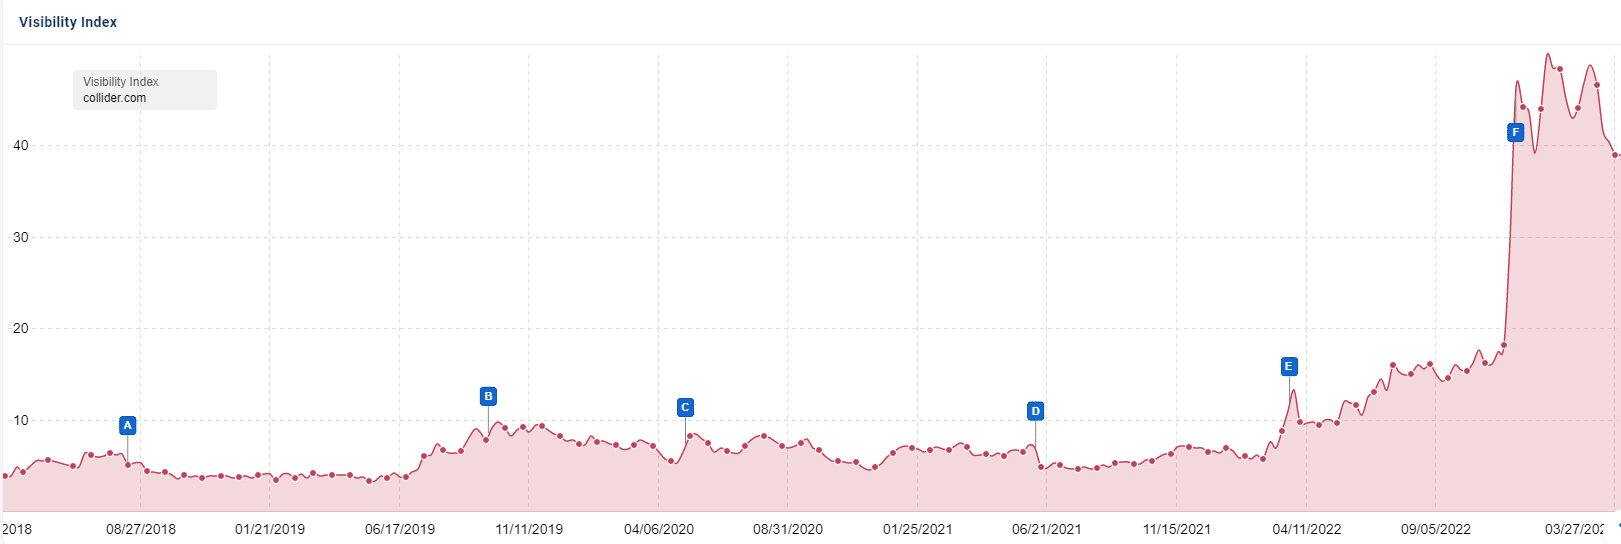 A graph showing collider.com's gains in traffic over the past several years, with a significant spike a the end of 2022.